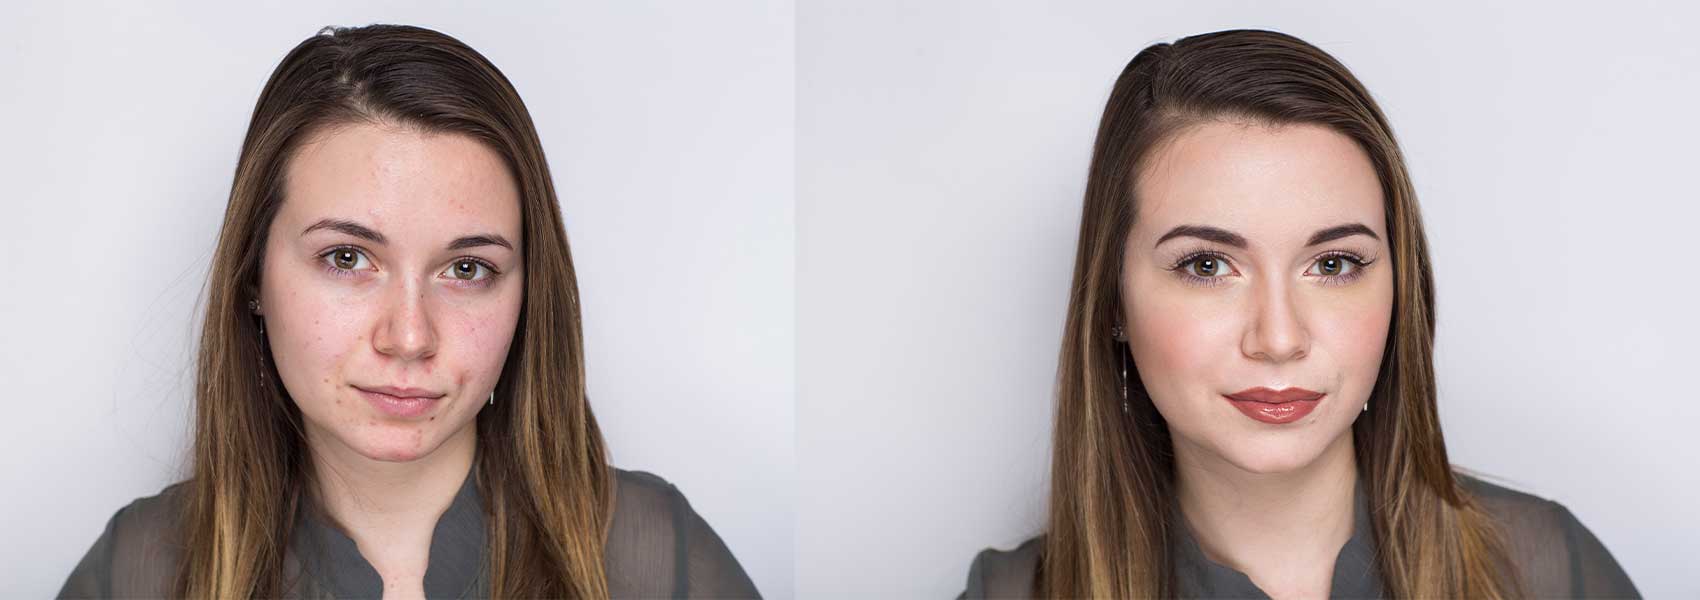 Beautiful woman before after face treatment